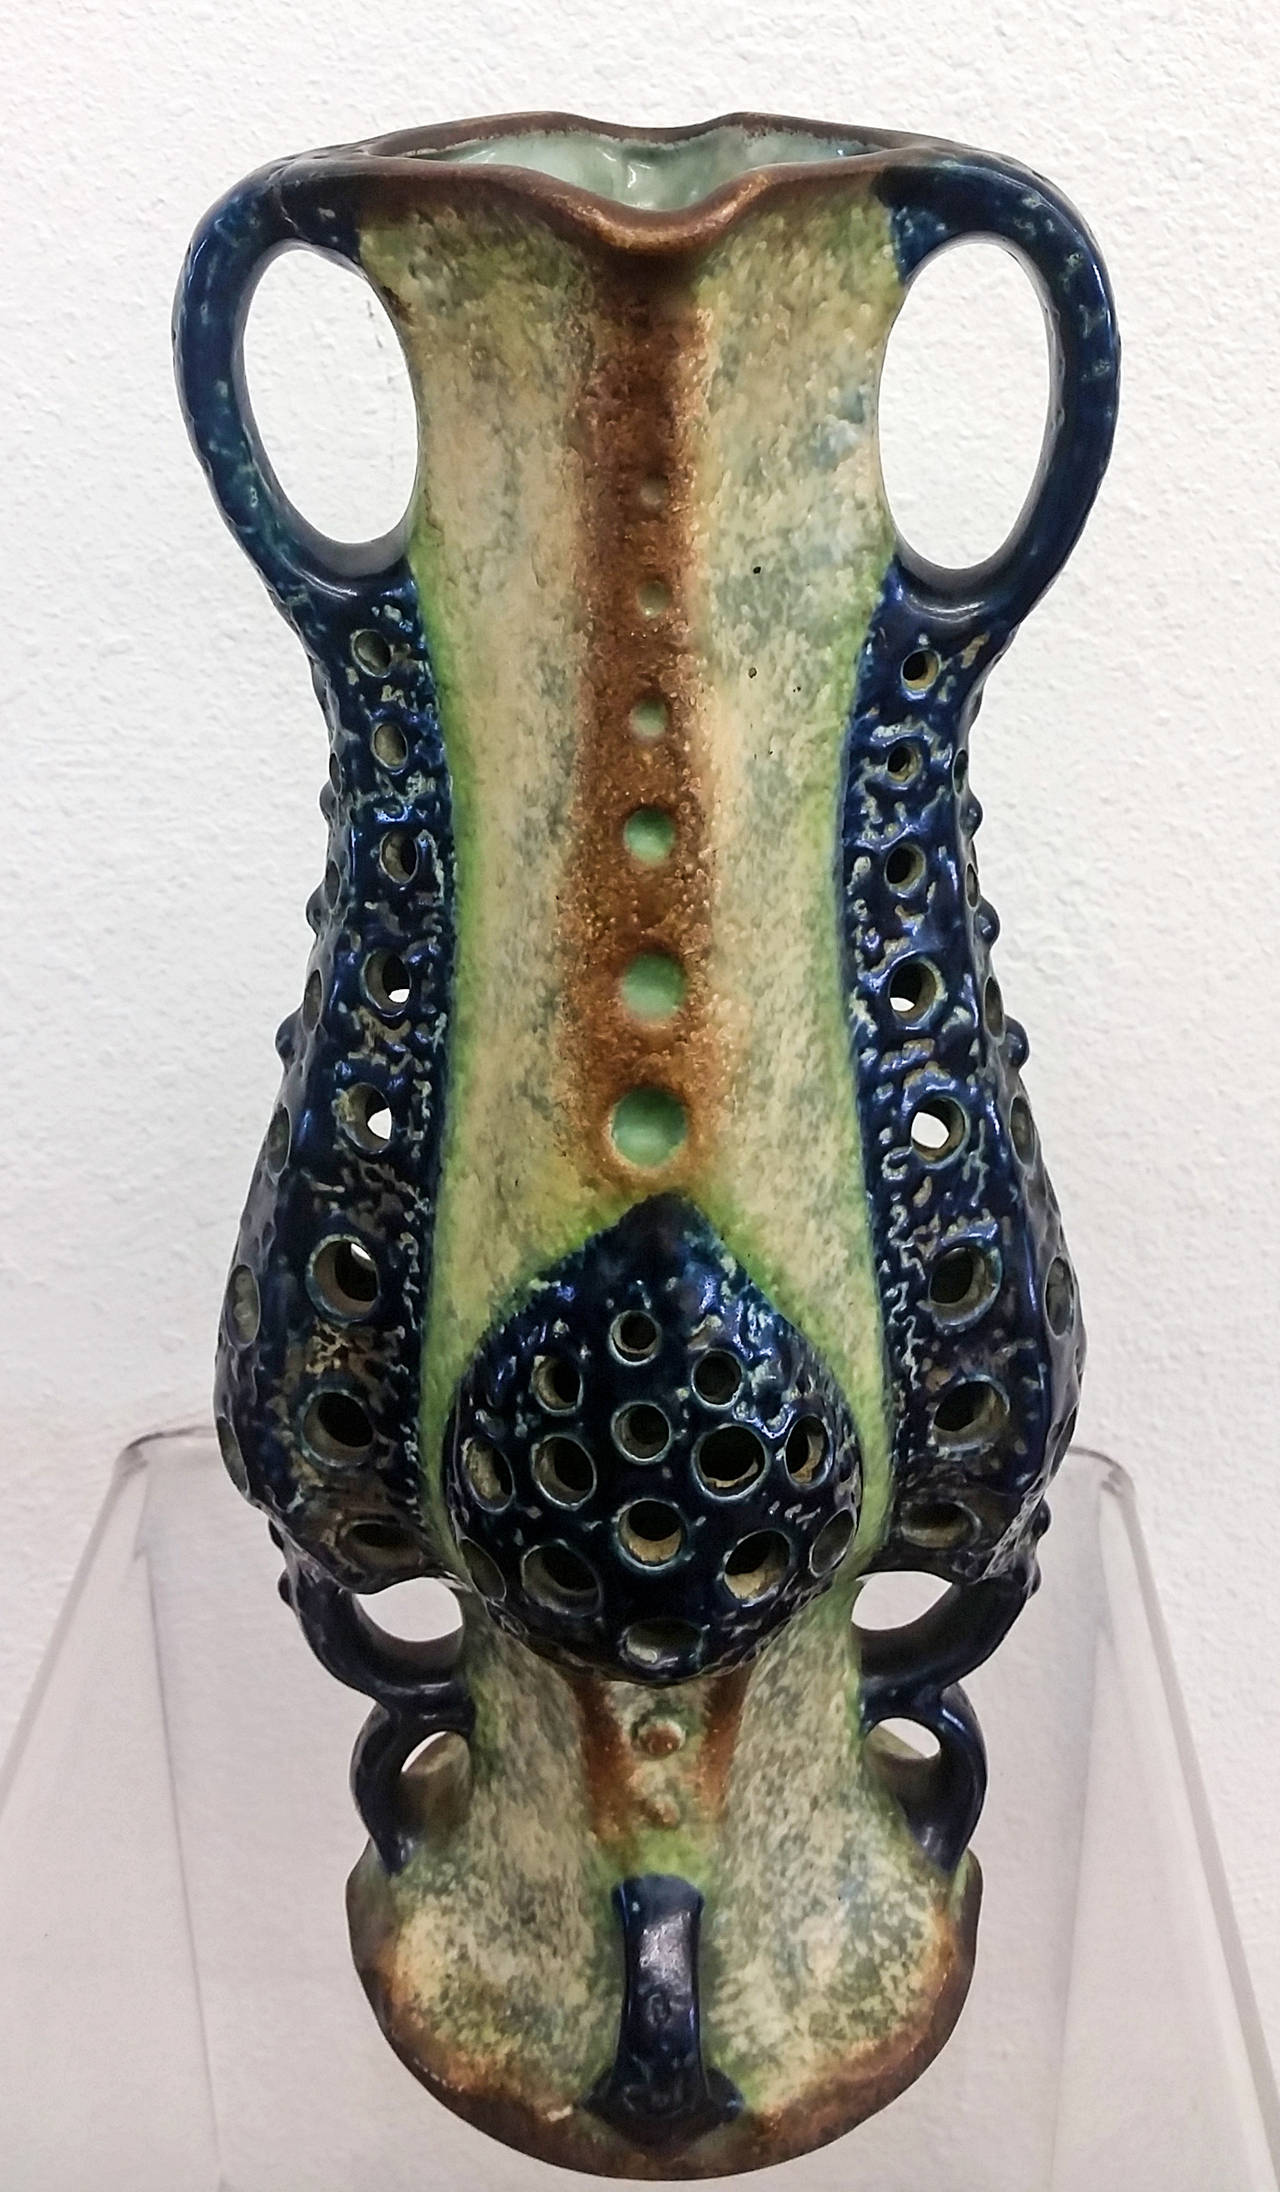 A large Amphora earthenware vase circa 1898. The unusual form based on undersea life has a yellow / cream oxidized underglaze and 4 reticulated organic cobalt handles all with burnished gold accents.

The piece is in impeccable condition with no